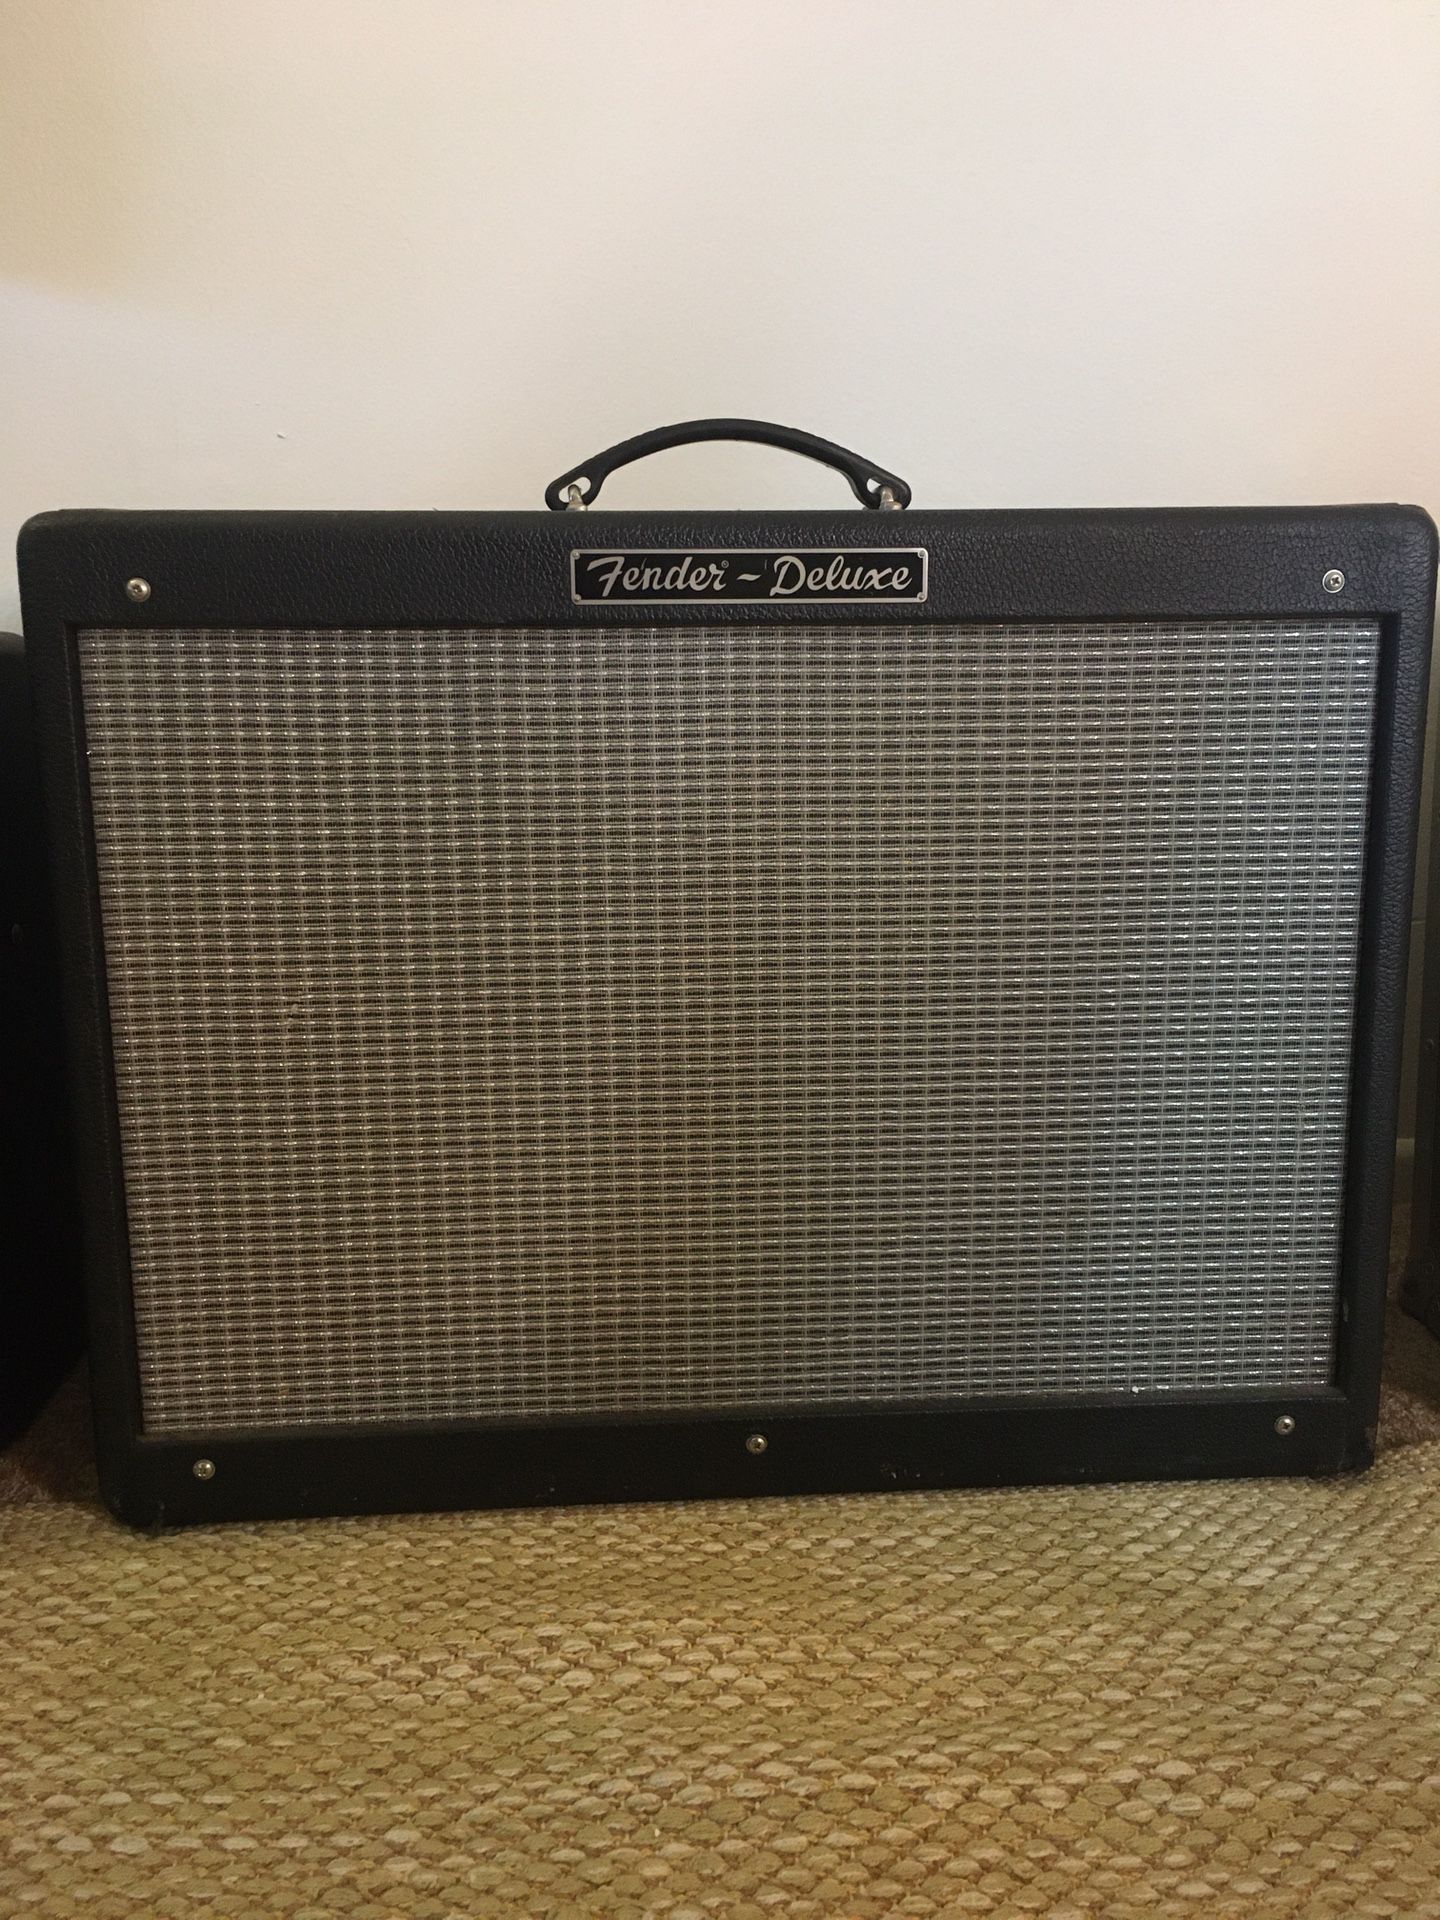 Fender Deluxe 40W Tube Guitar Amp - MADE IN USA